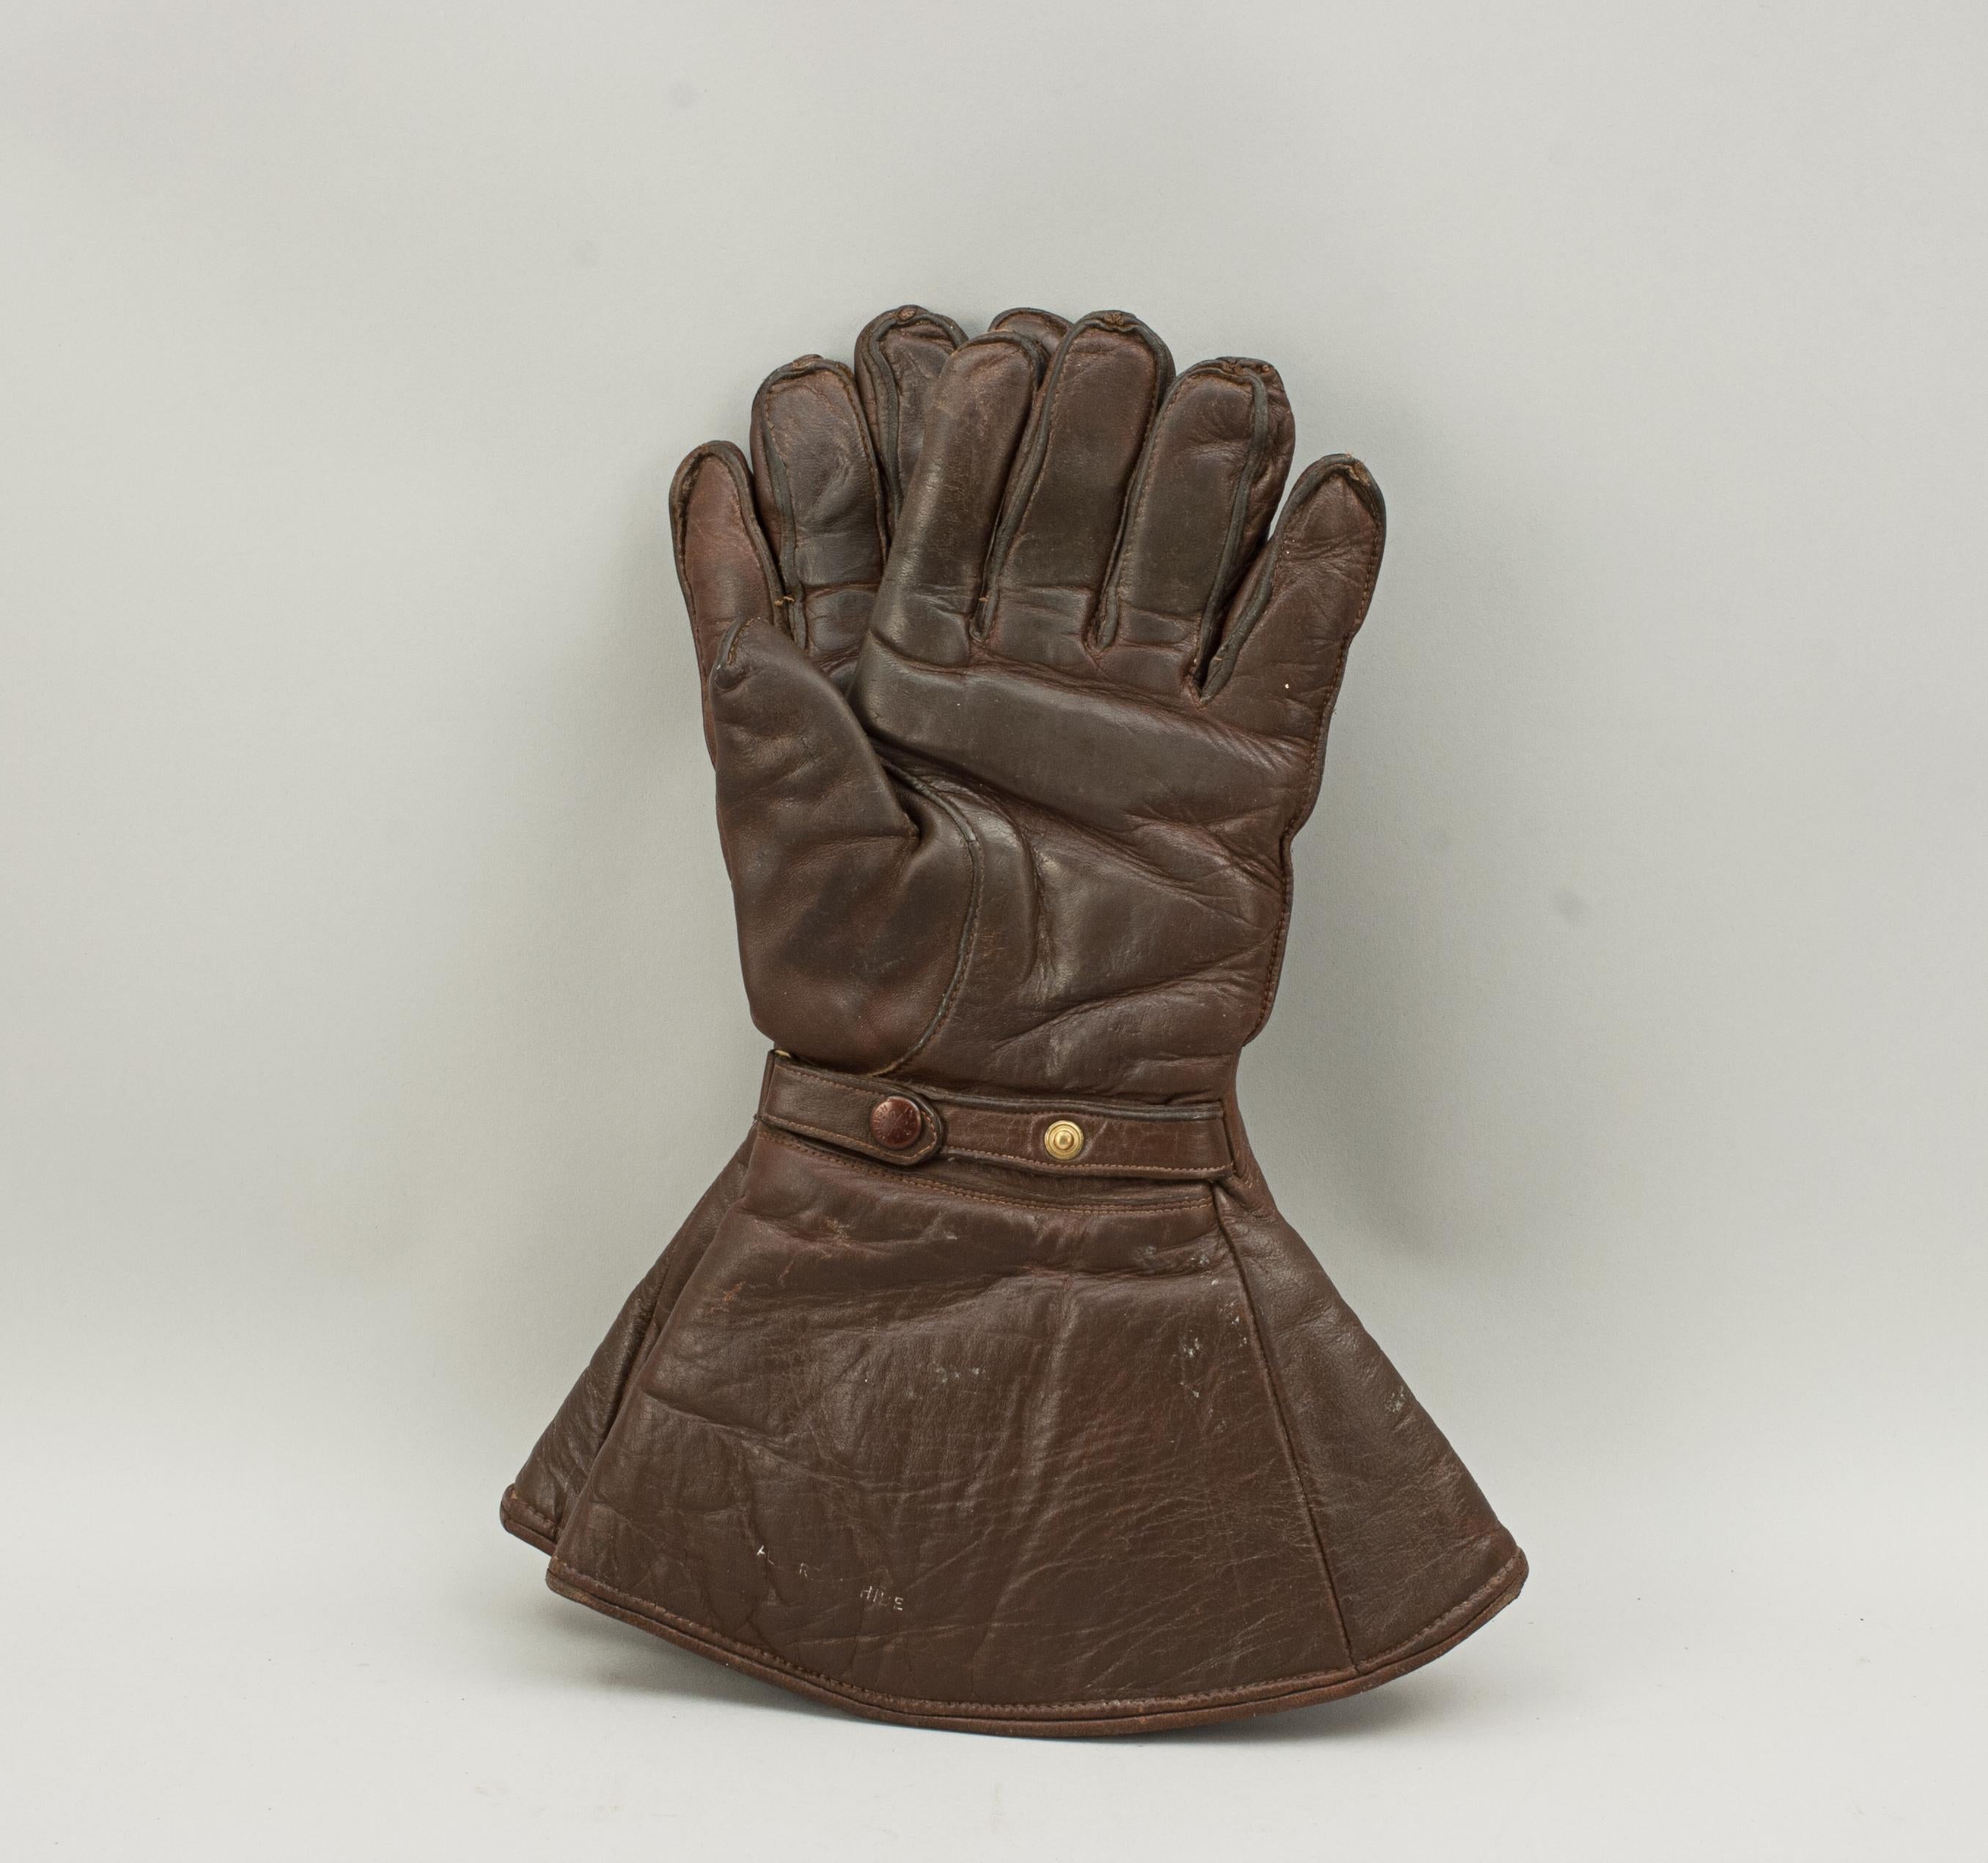 Vintage leather motoring gloves, gauntlets.
A nice pair of leather motoring gauntlets by Hutchinson, London. The brown leather gloves are wool lined and made in England. They are usable gloves for a small to medium hand with an adjustable leather